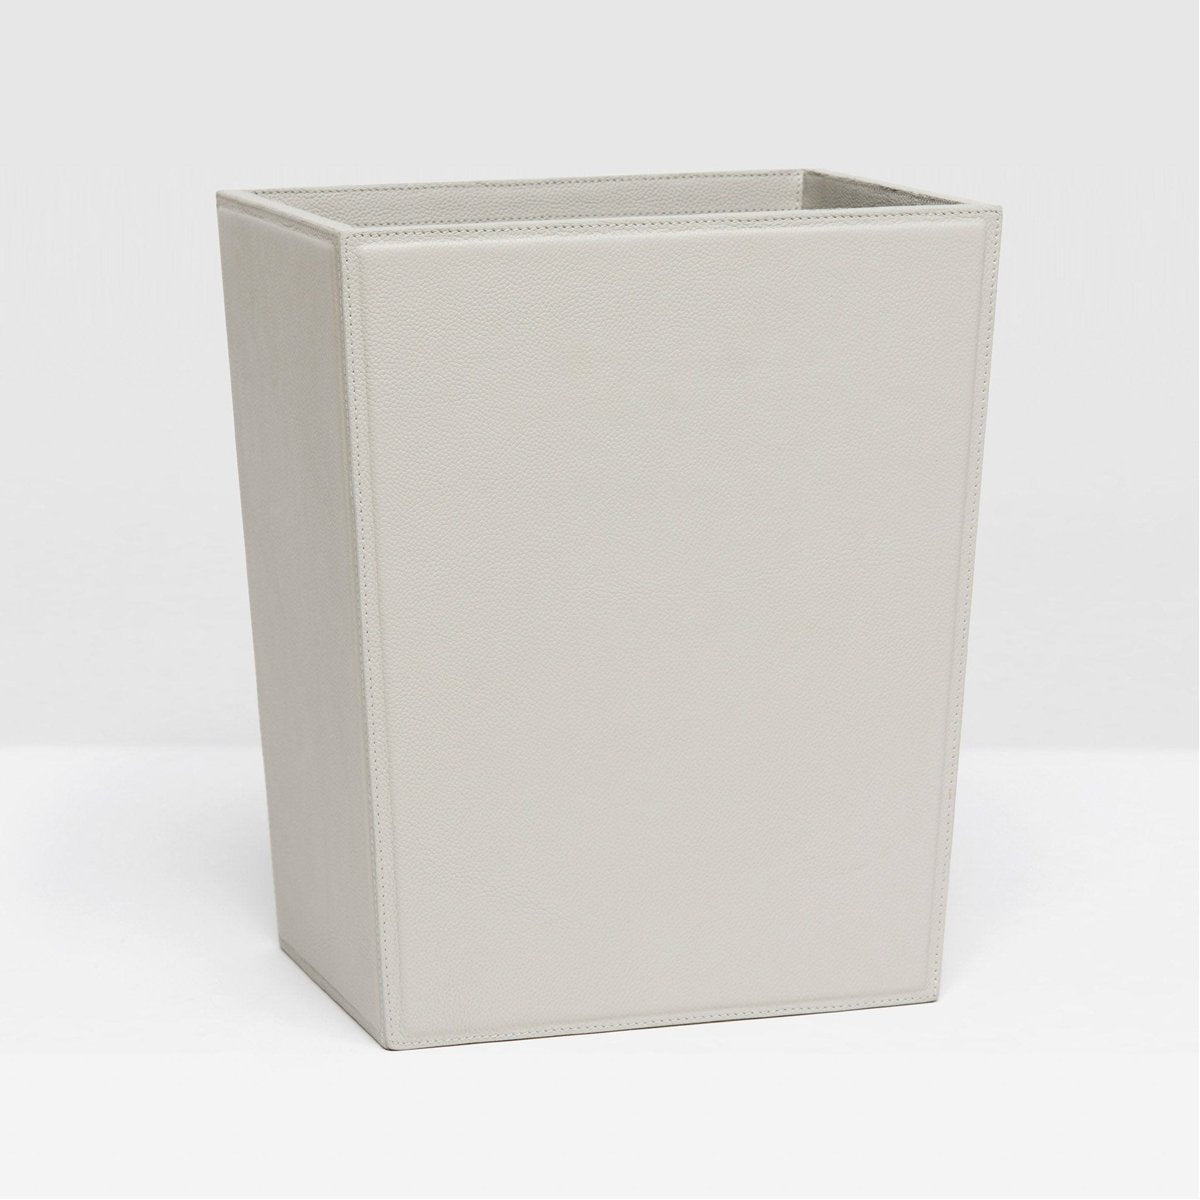 Pigeon and Poodle Asby Rectangular Wastebasket, Tapered